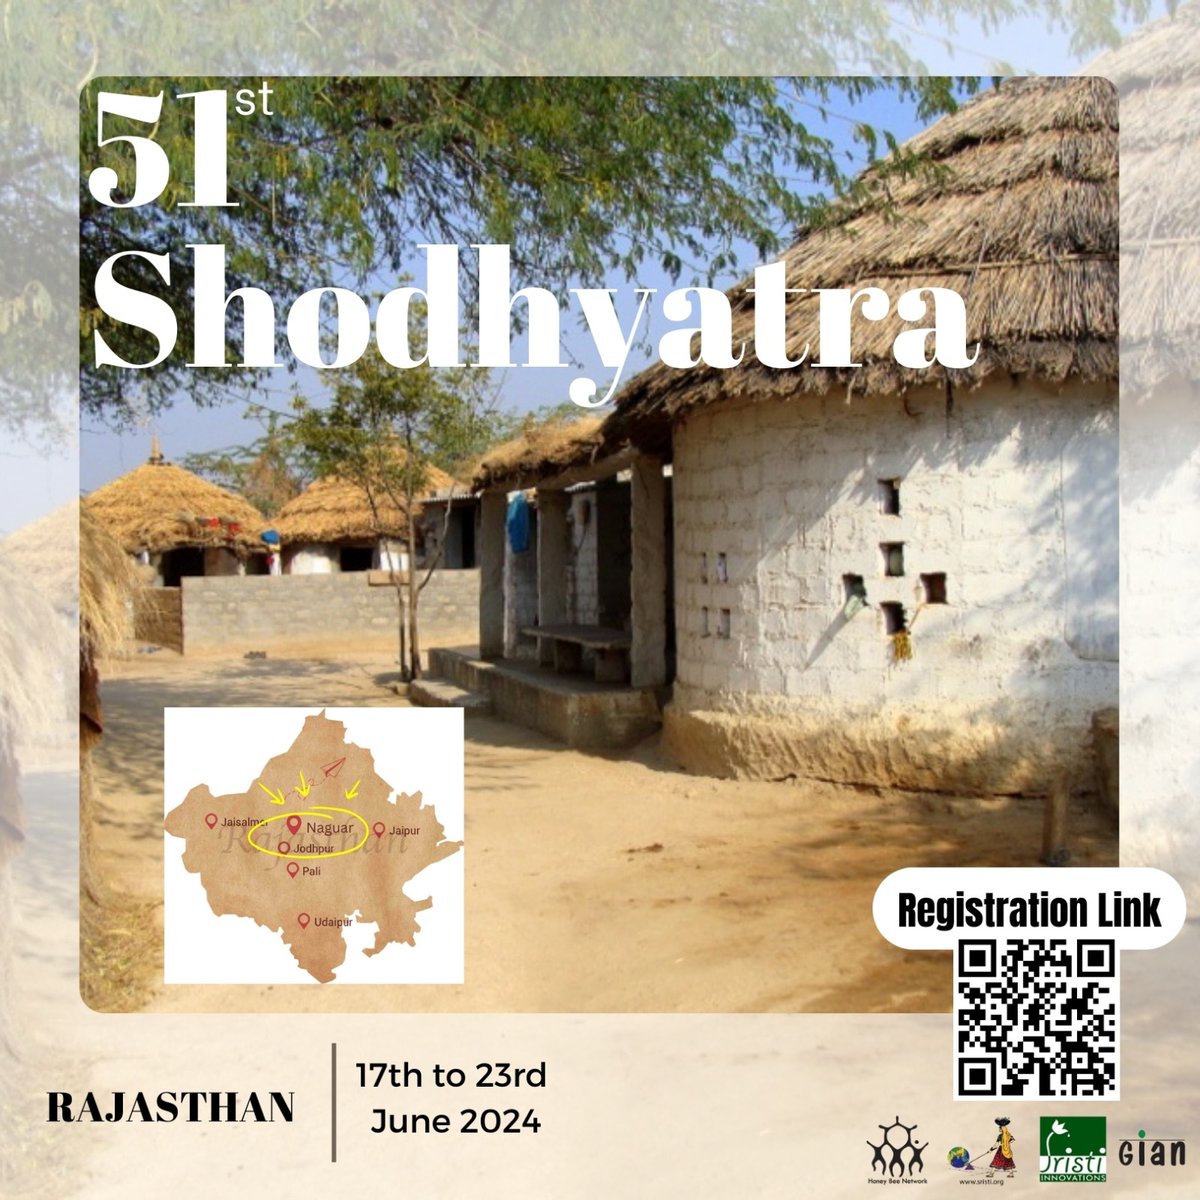 Join us for an exciting summer journey! Let's come together to learn from experimental farmers and rural innovators, as well as from four master teachers. Date: 17th to 23rd June, 2024 Place: Nagaur, Rajasthan. Register for the 51st Shodhyatra here: lnkd.in/dwKG9tya